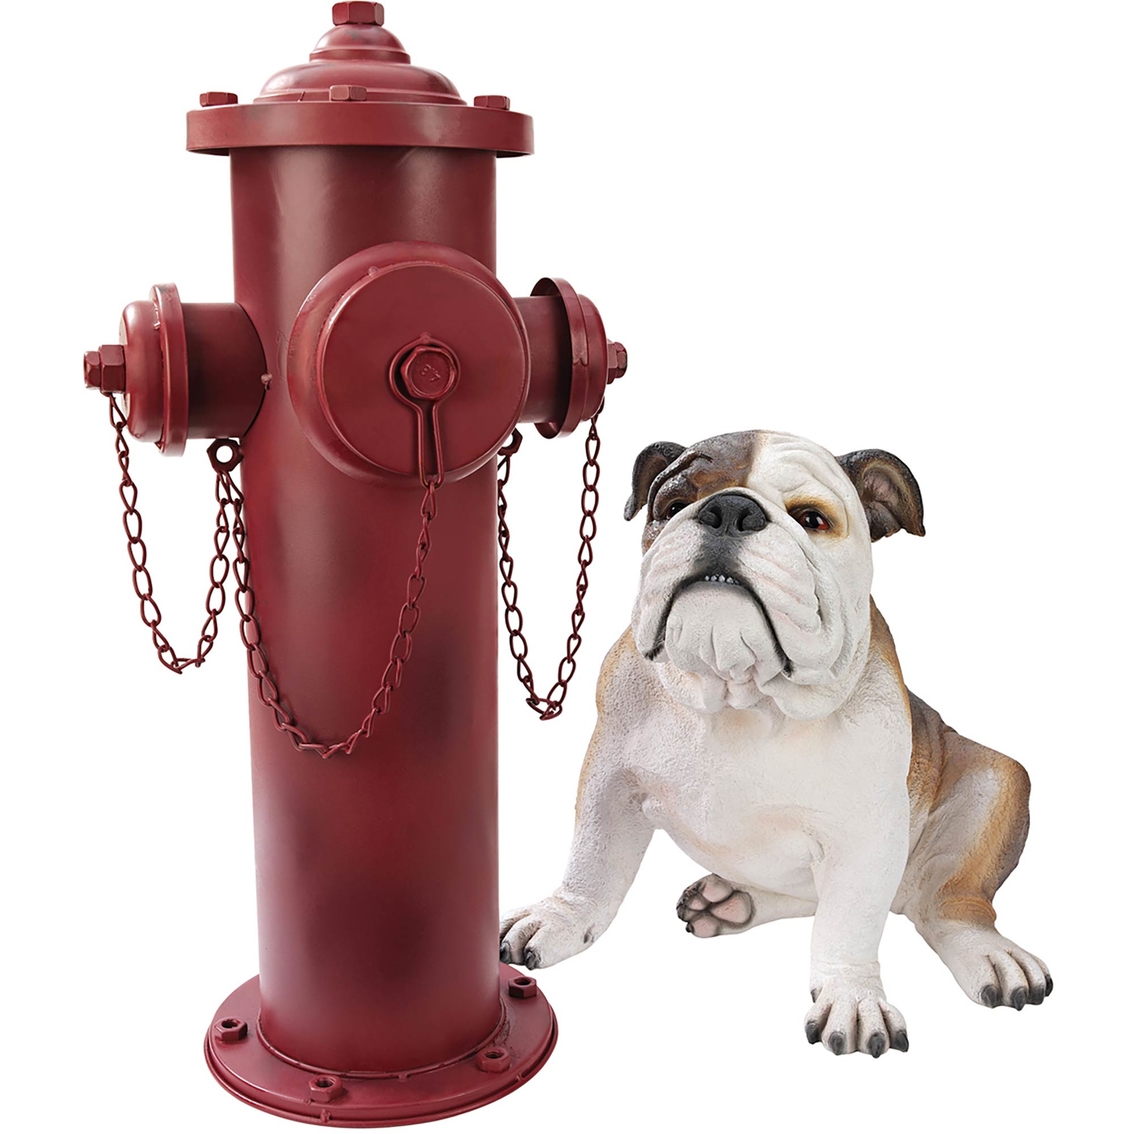 Design Toscano Vintage Fire Hydrant Statue - Image 3 of 4